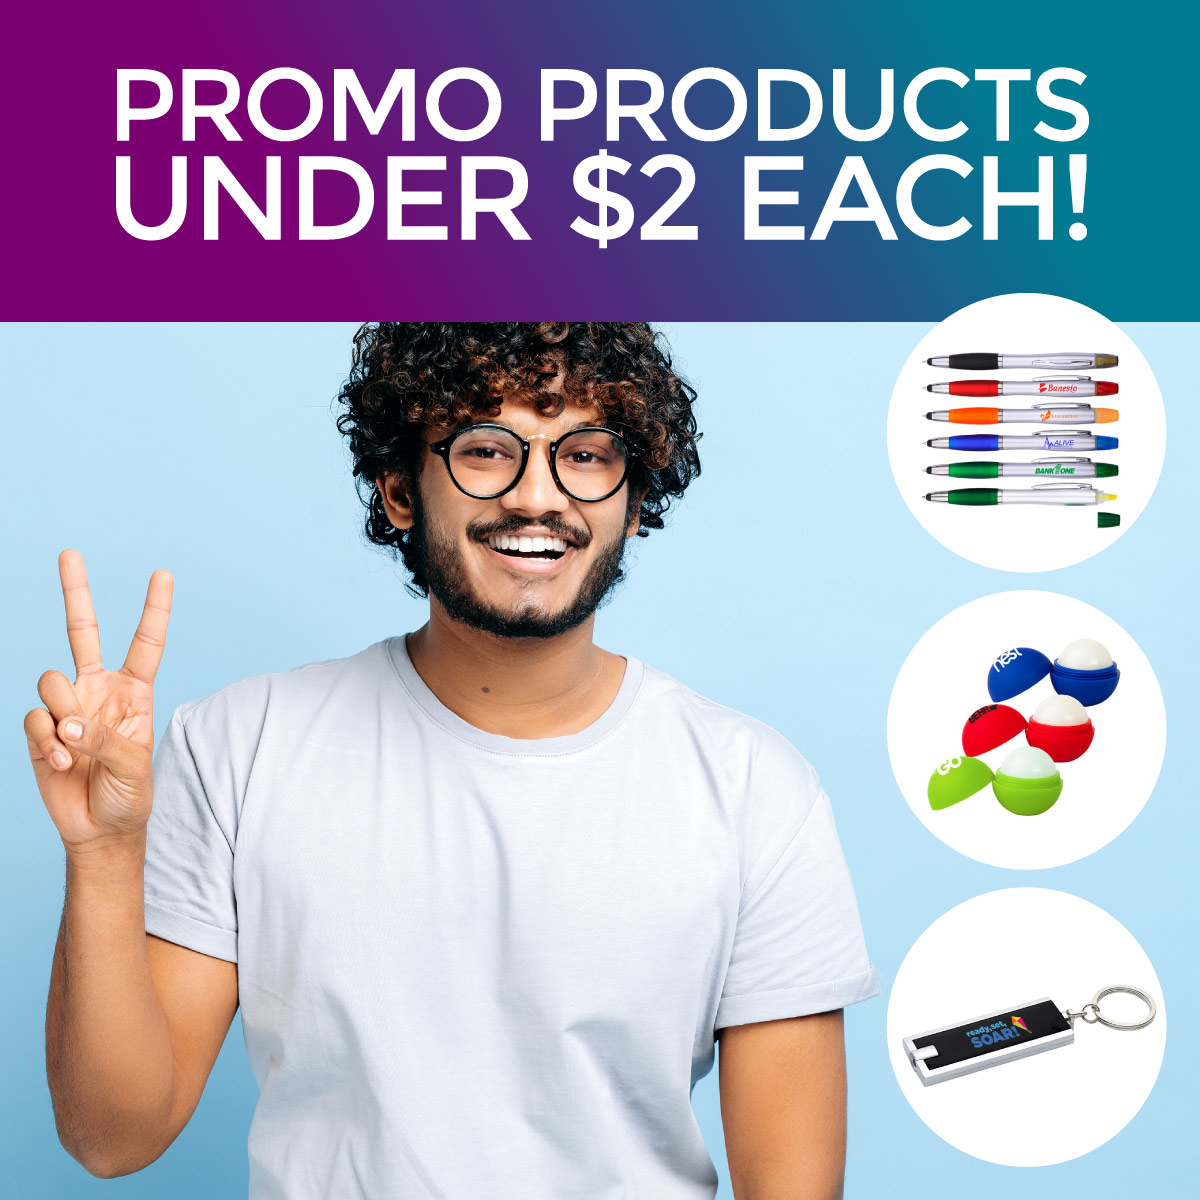 Promotional Products Under $2 each